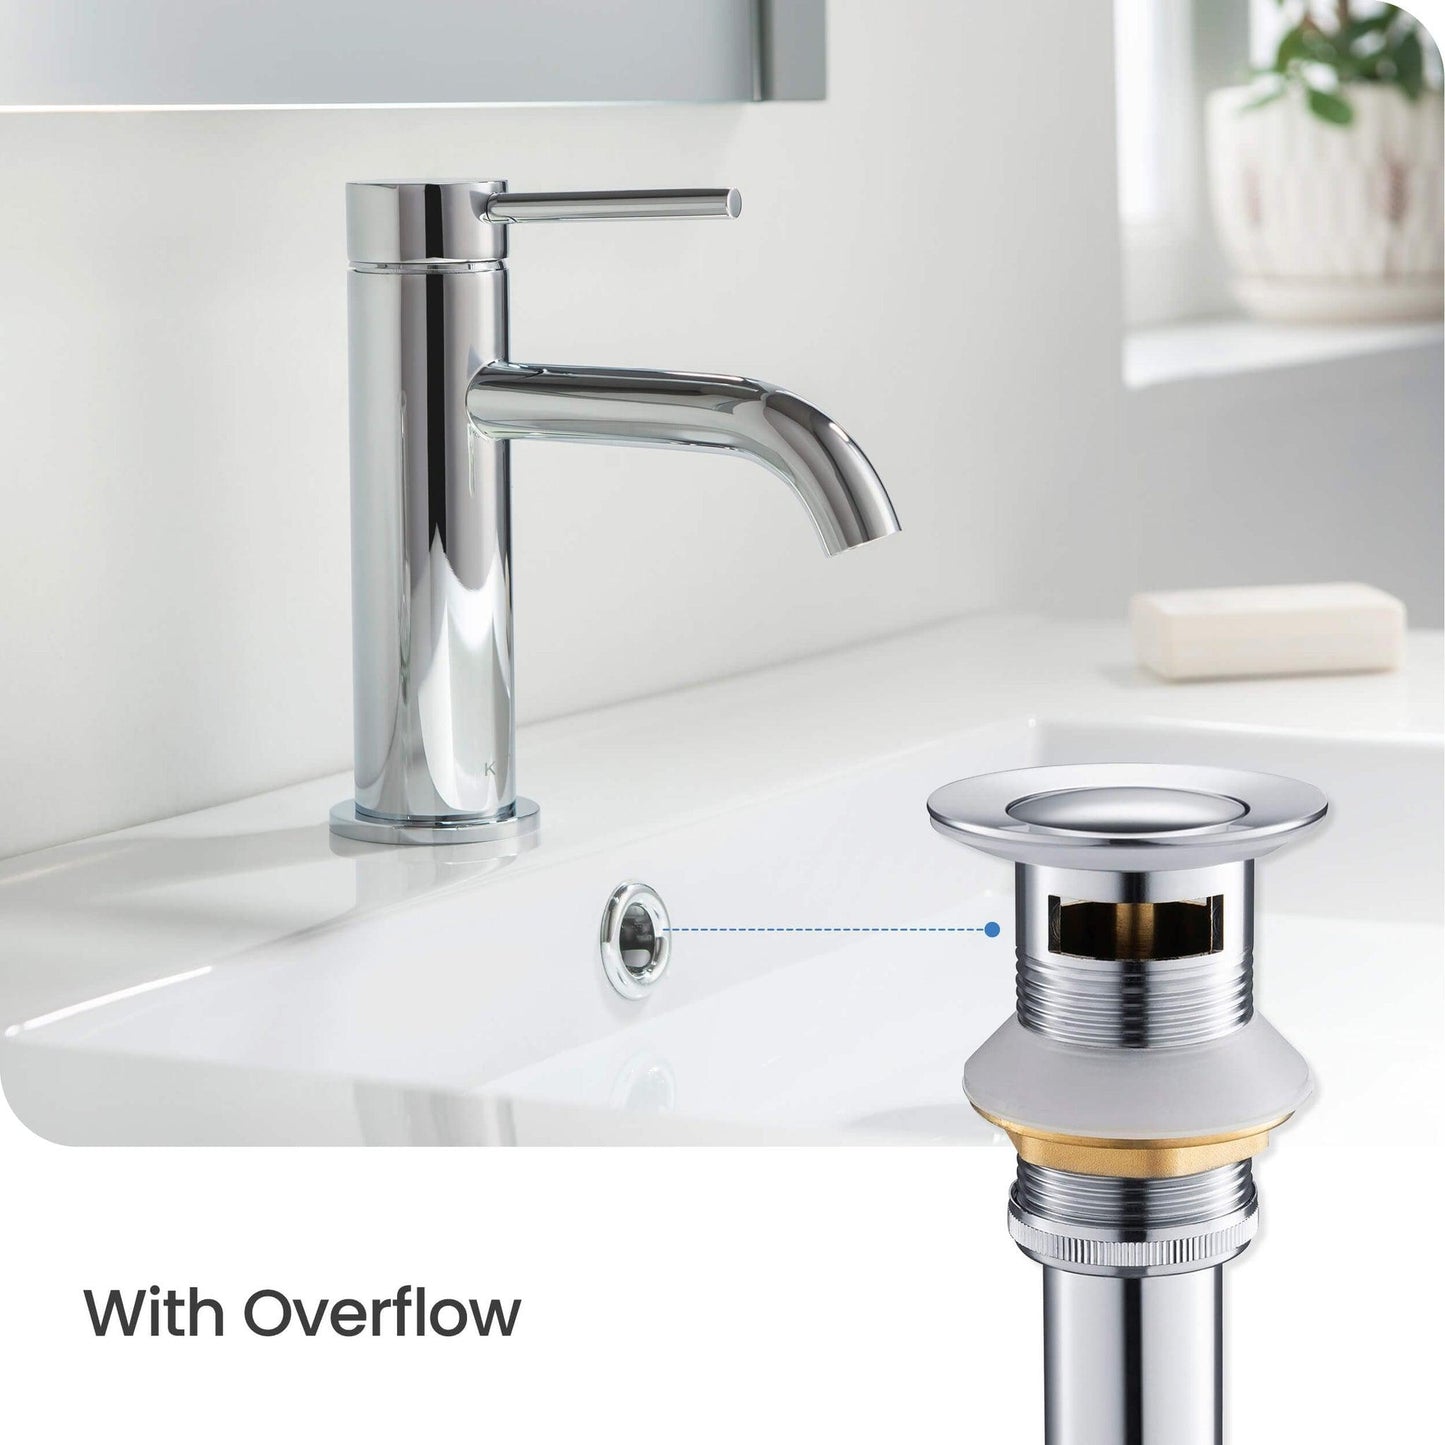 KIBI Brass Bathroom Sink Pop-Up Drain Stopper Small Cover With Overflow in Chrome Finish